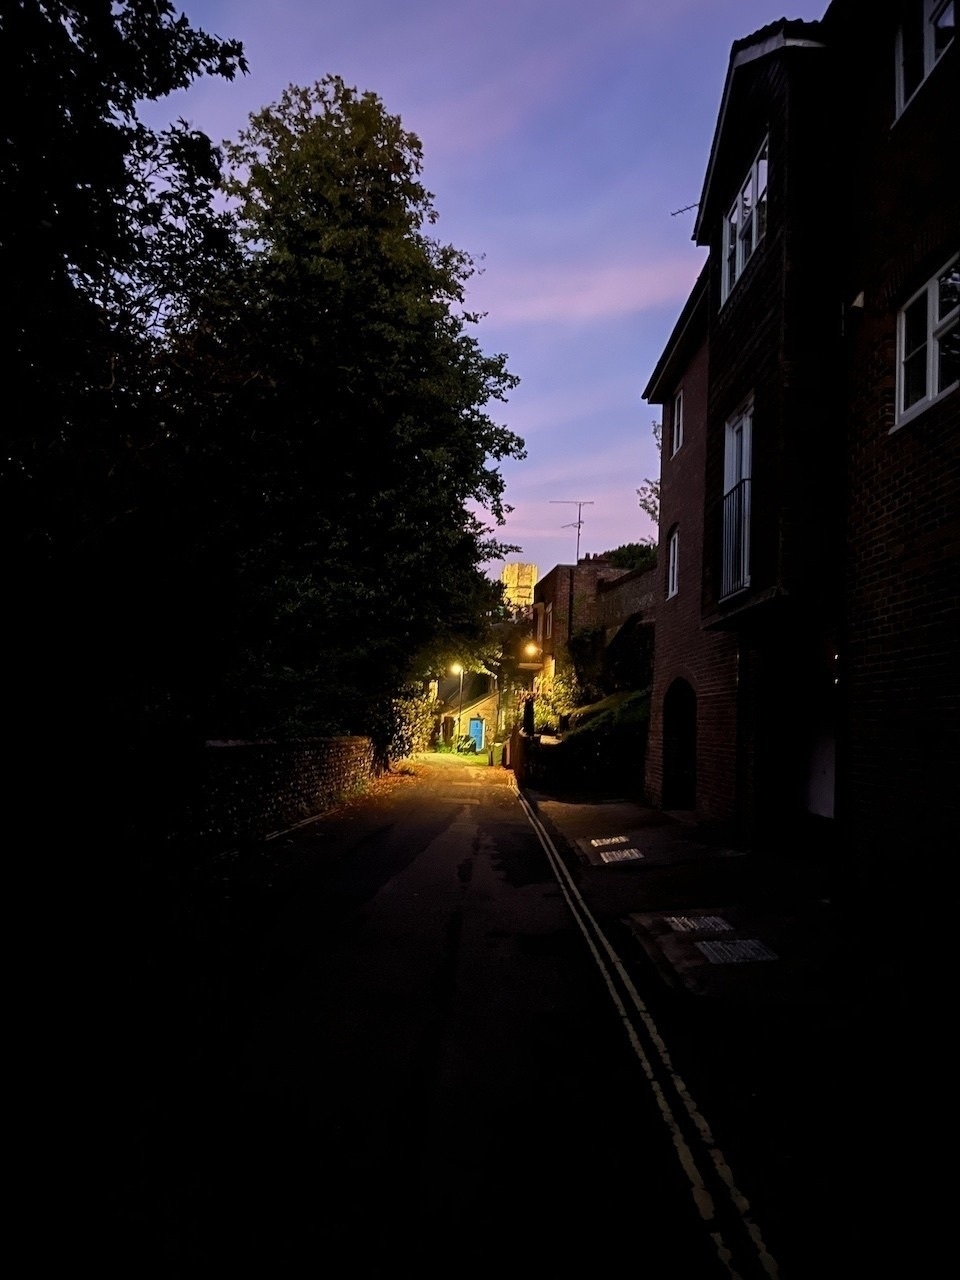 A view down a dark and quiet lane, at dusk. Near the end of the lane, in a pool of yellow light is a blue door. Above, a castle is lit up, appearing golden against a lavender coloured sky.